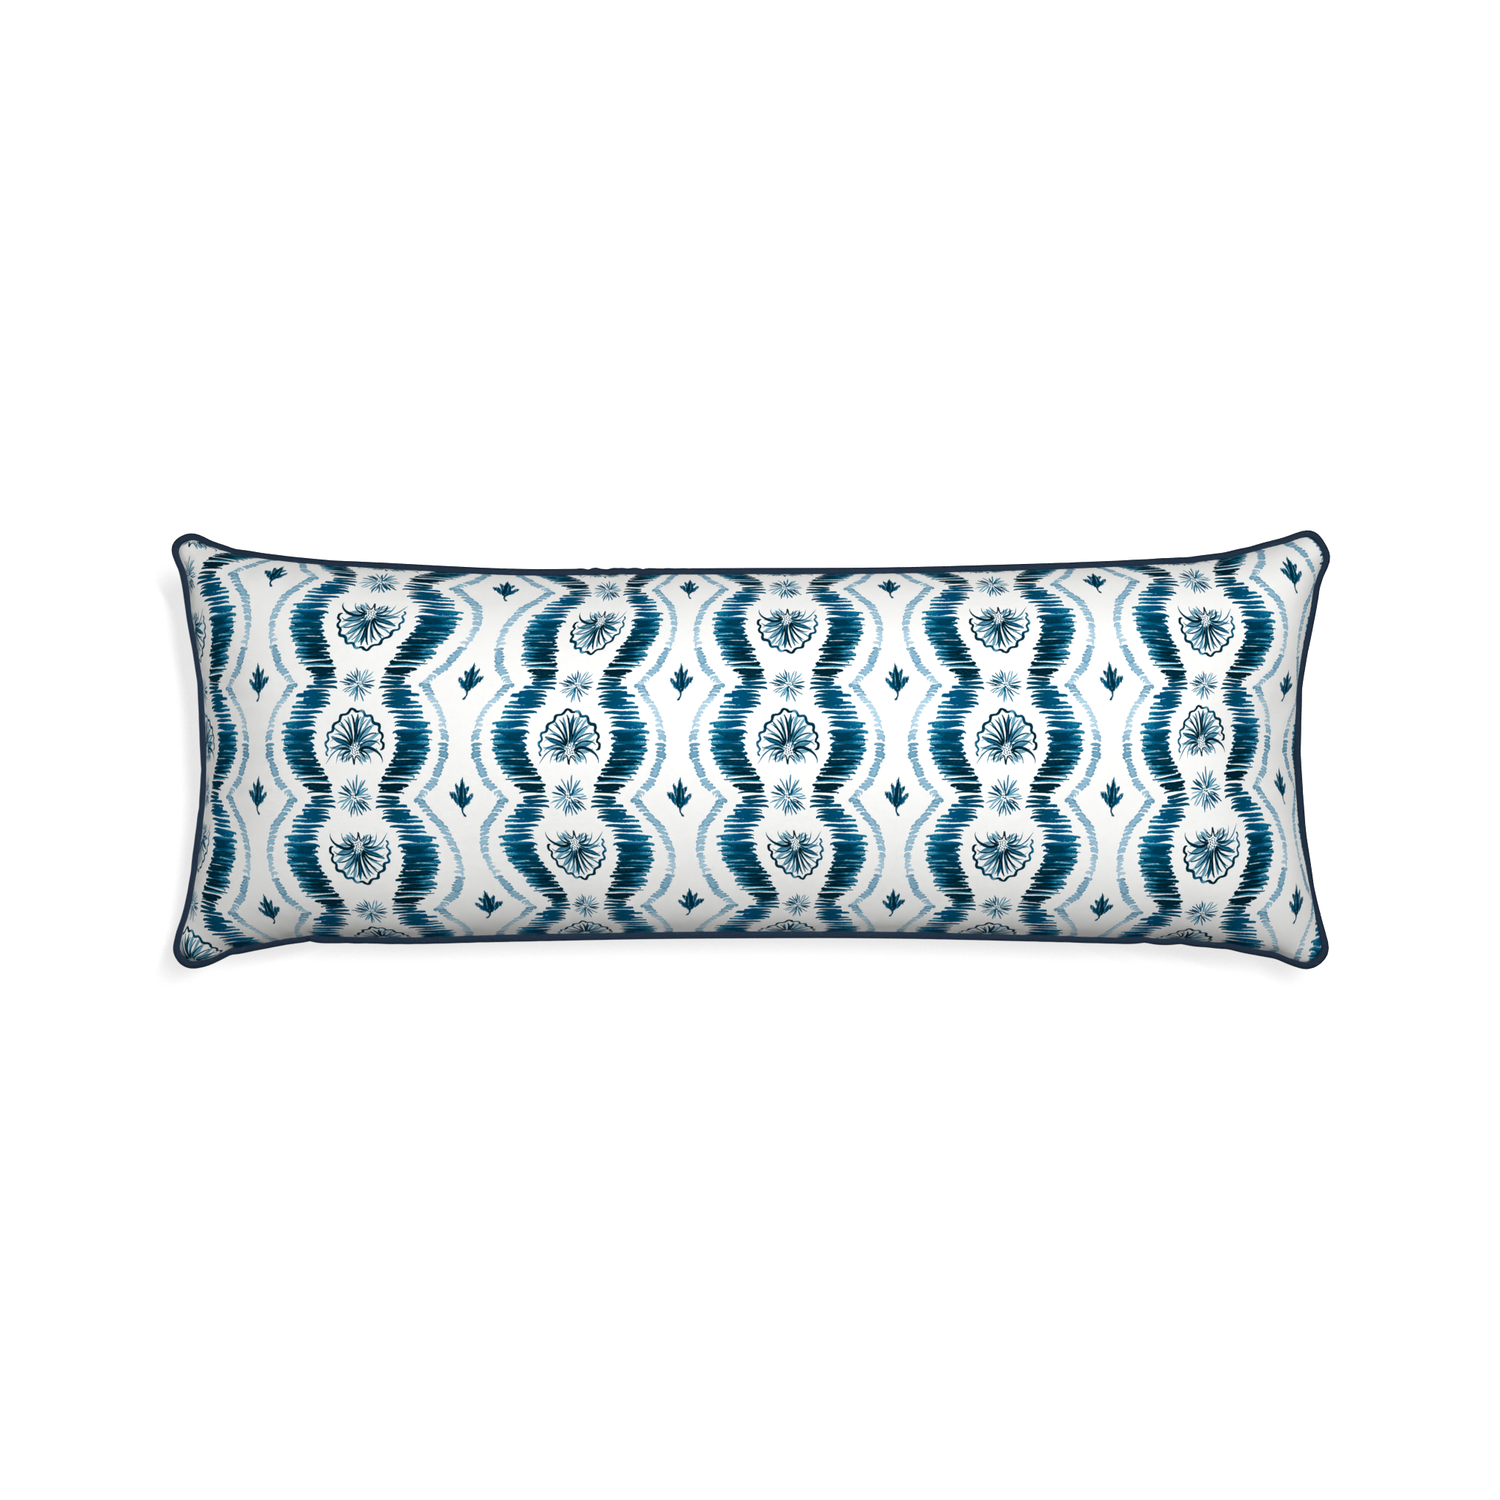 Xl-lumbar alice custom blue ikatpillow with c piping on white background